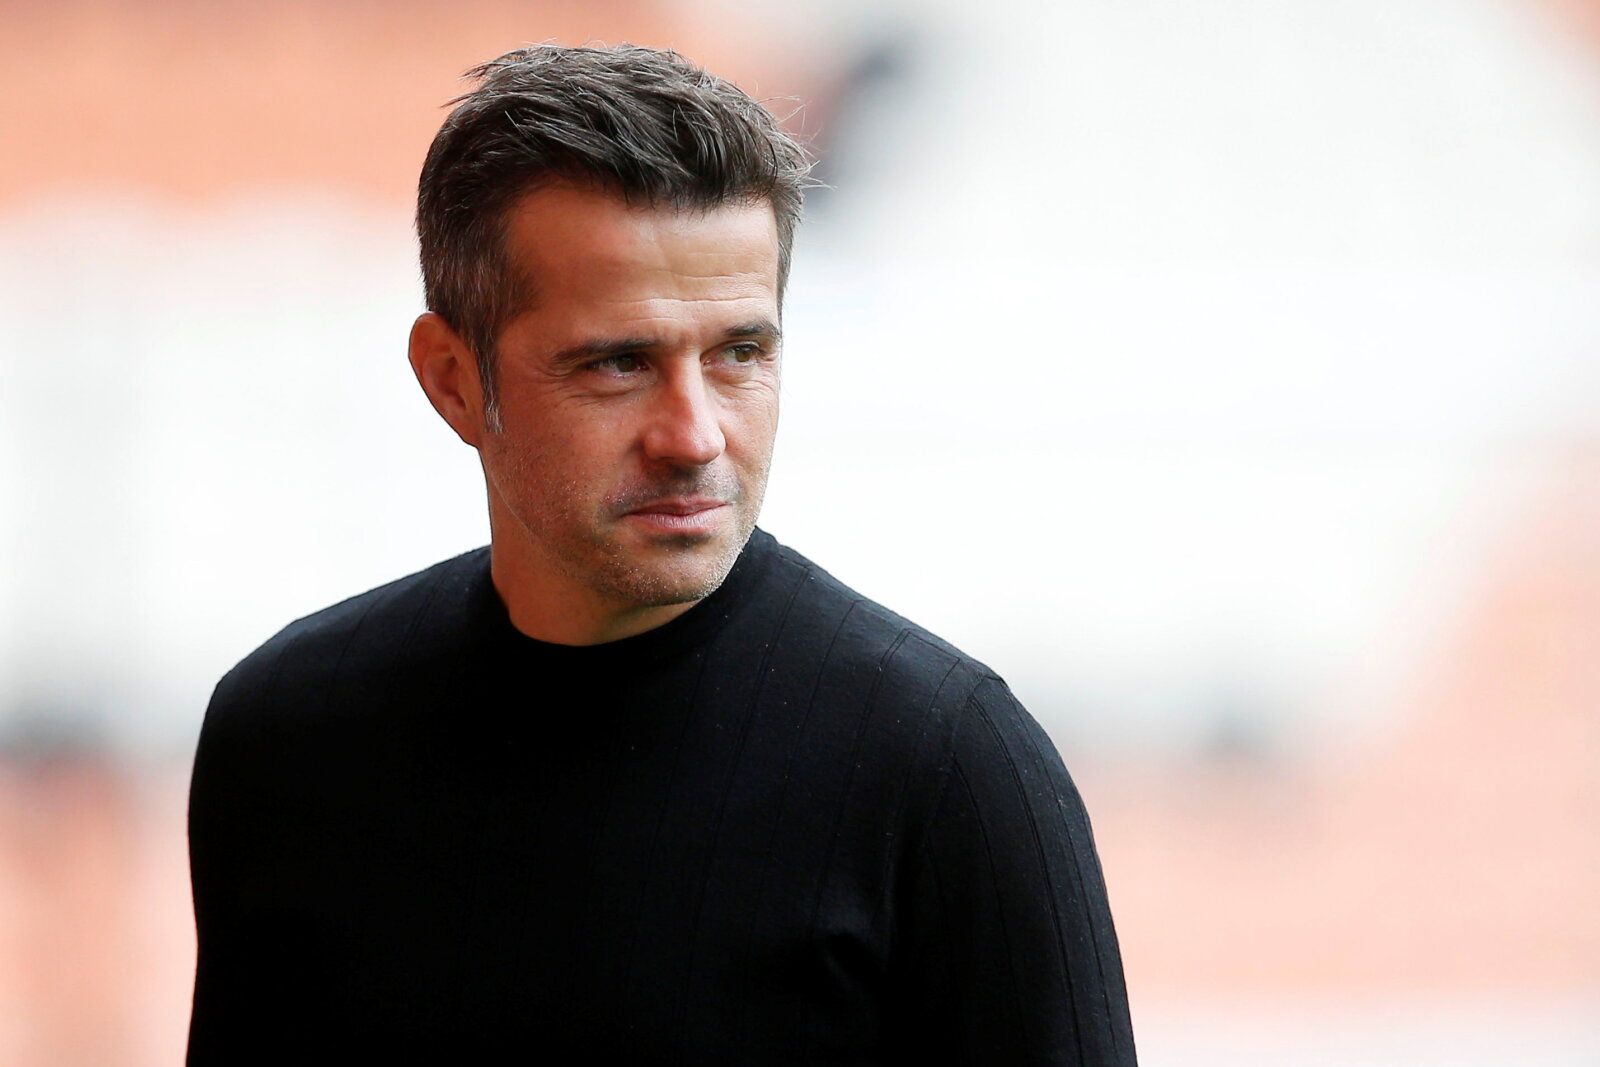 Soccer Football - Championship - Blackpool v Fulham - Bloomfield Road, Blackpool, Britain - September 11, 2021 Fulham Manager Marco Silva ahead of the match  Action Images/Craig Brough  EDITORIAL USE ONLY. No use with unauthorized audio, video, data, fixture lists, club/league logos or 